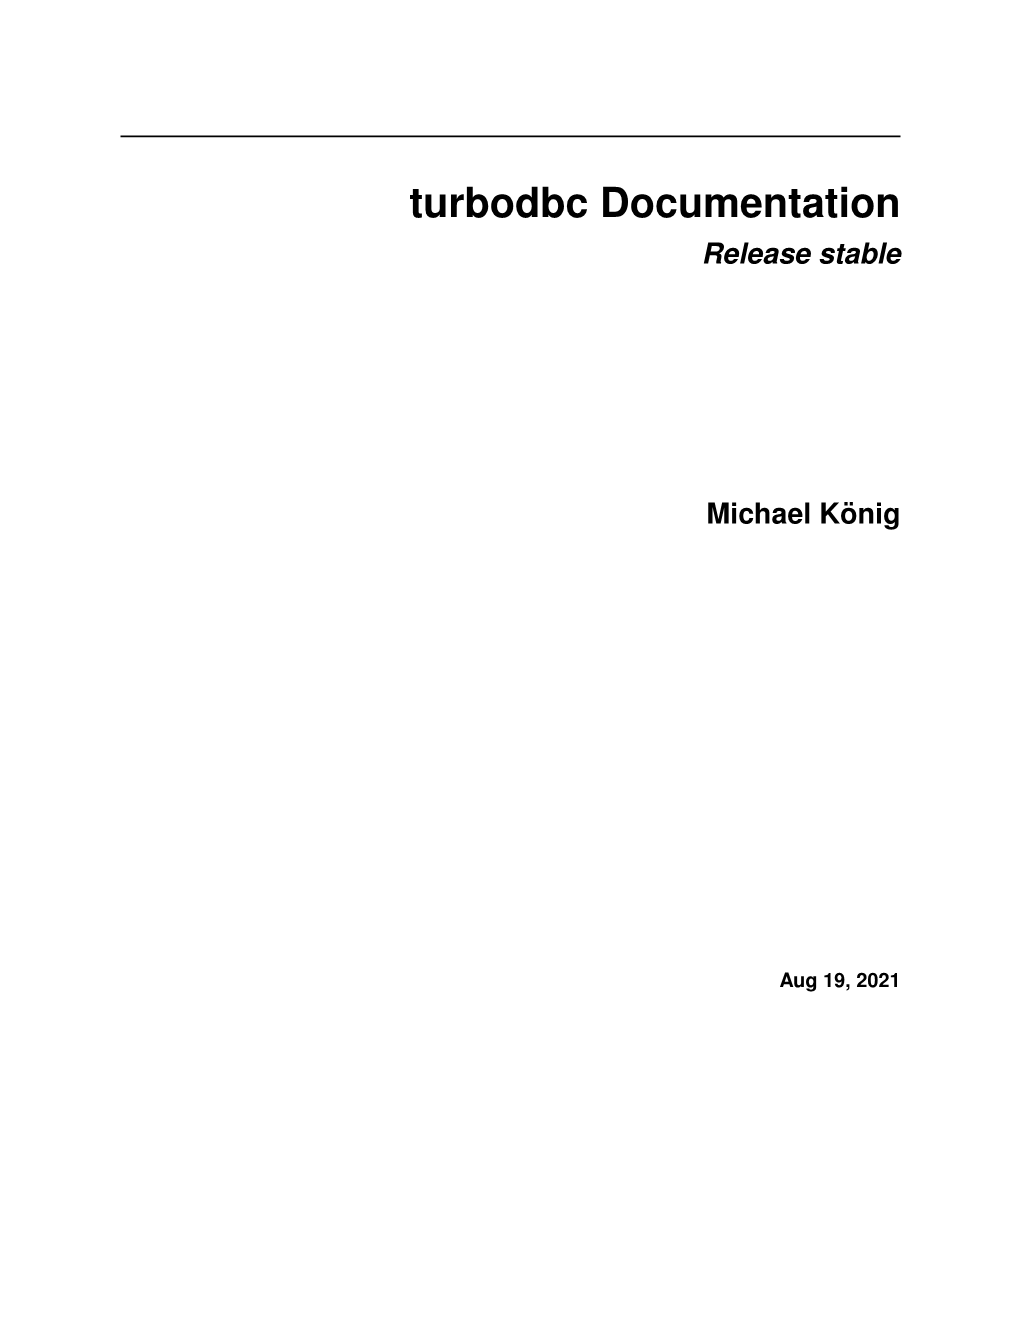 Turbodbc Documentation Release Stable